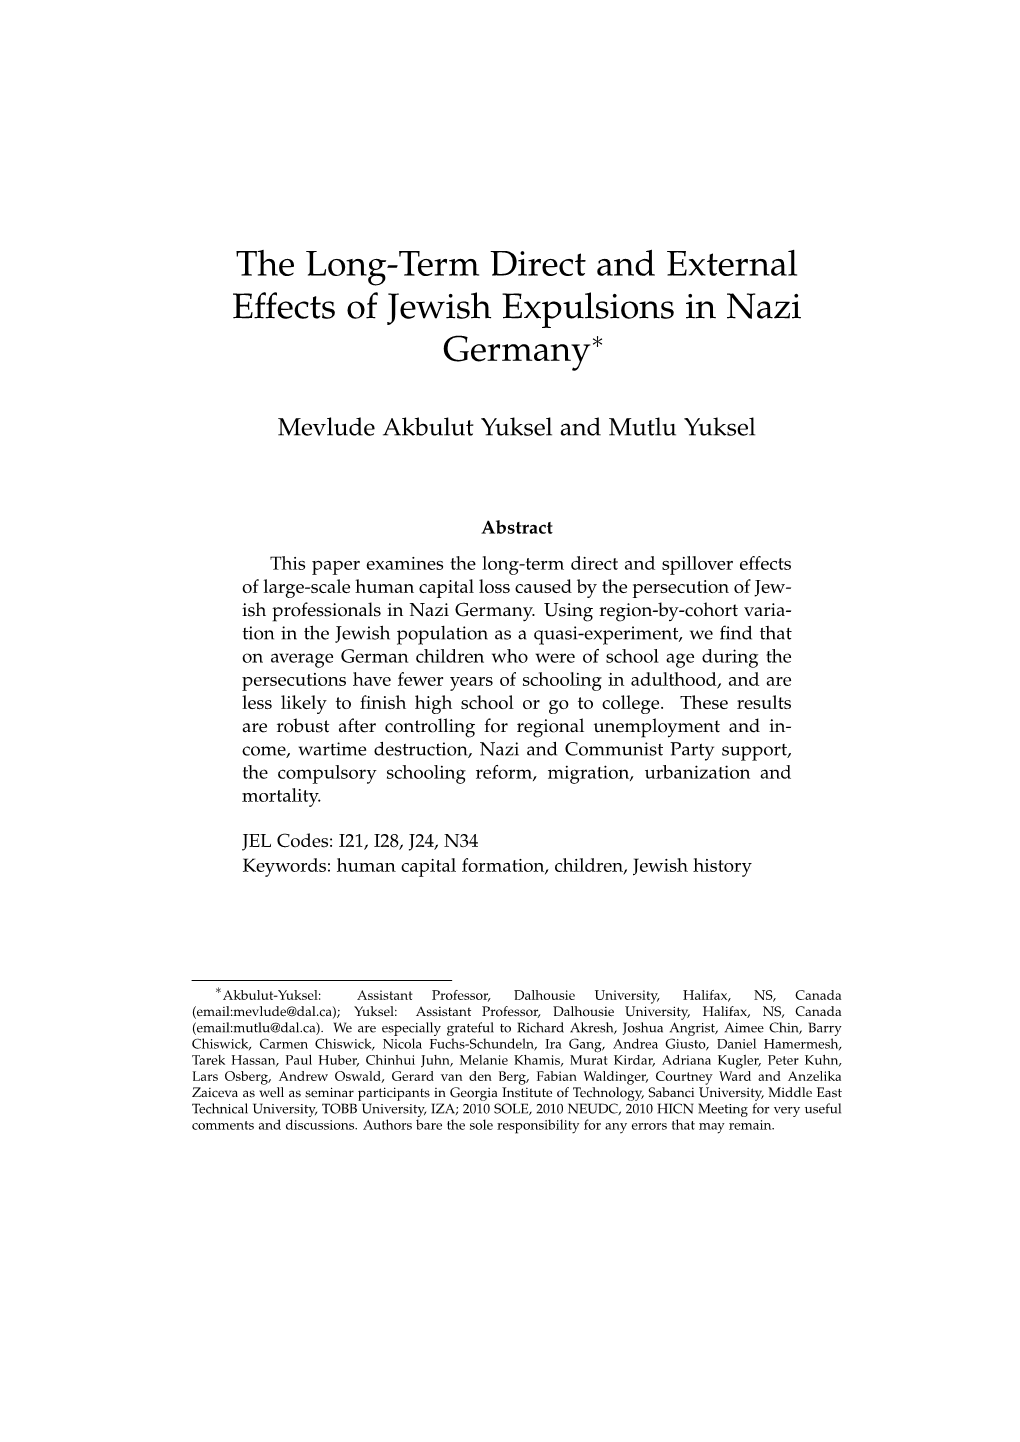 The Long-Term Direct and External Effects of Jewish Expulsions in Nazi Germany∗